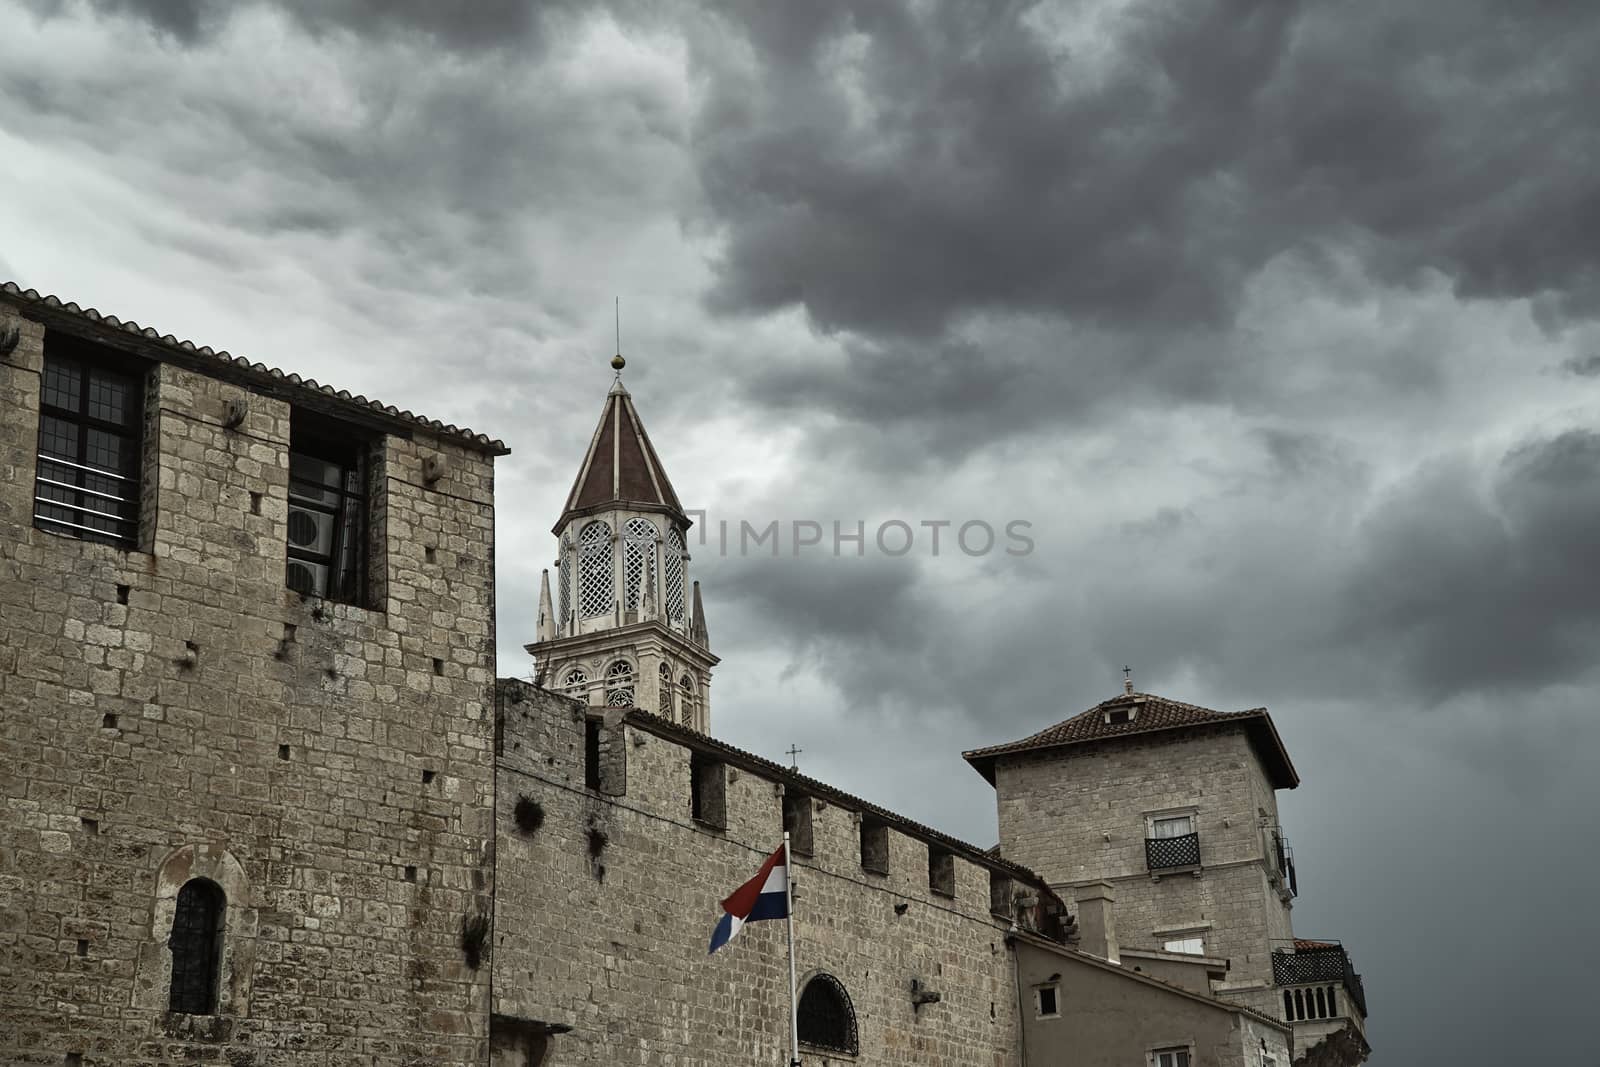 Medieval battlements and cathedral tower in the town of Trogir in Croatia